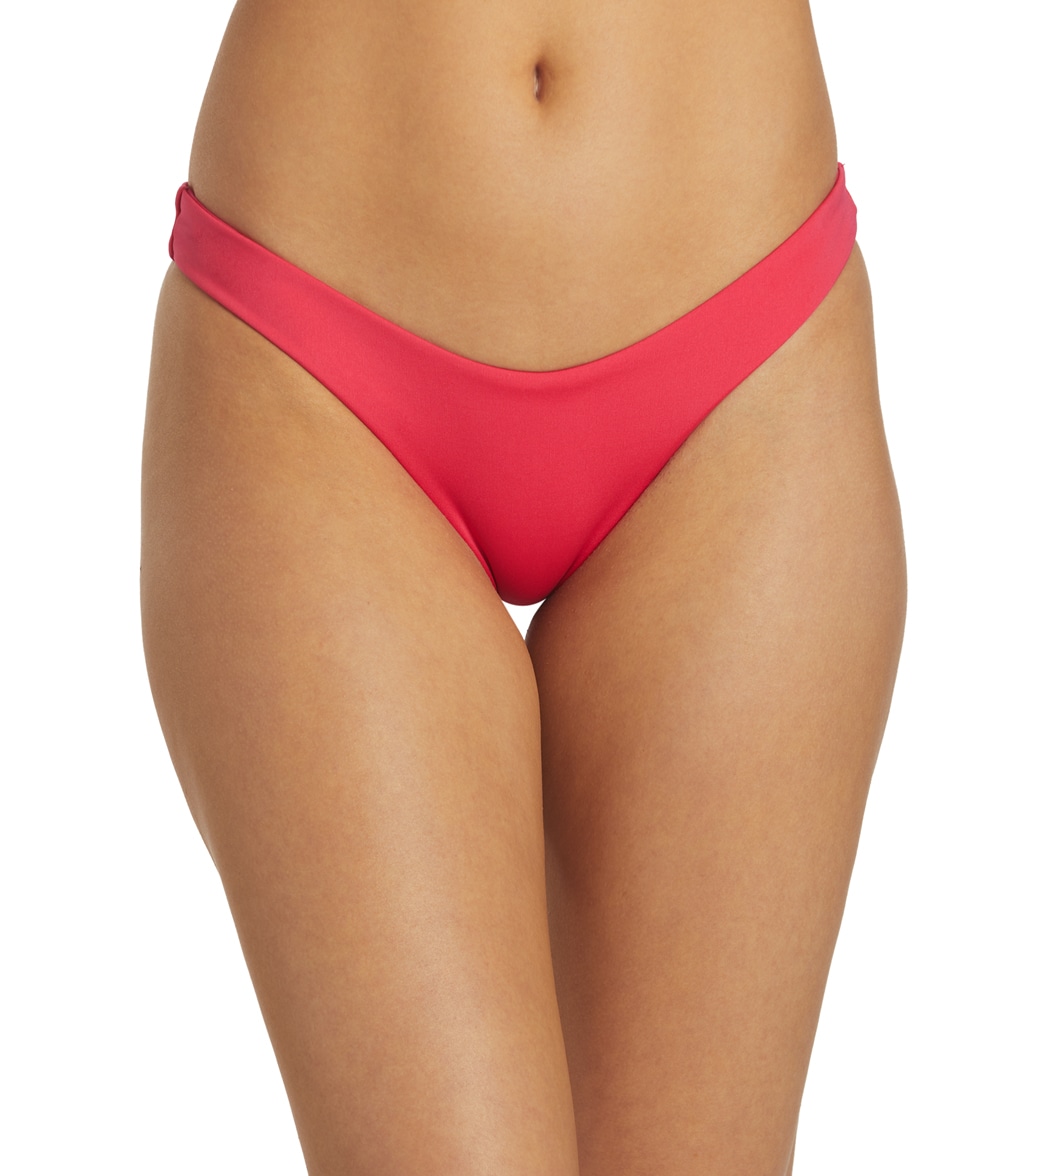 Hurley Women's Max Solid Cheeky French Bikini Bottom - Candy Pop Large - Swimoutlet.com